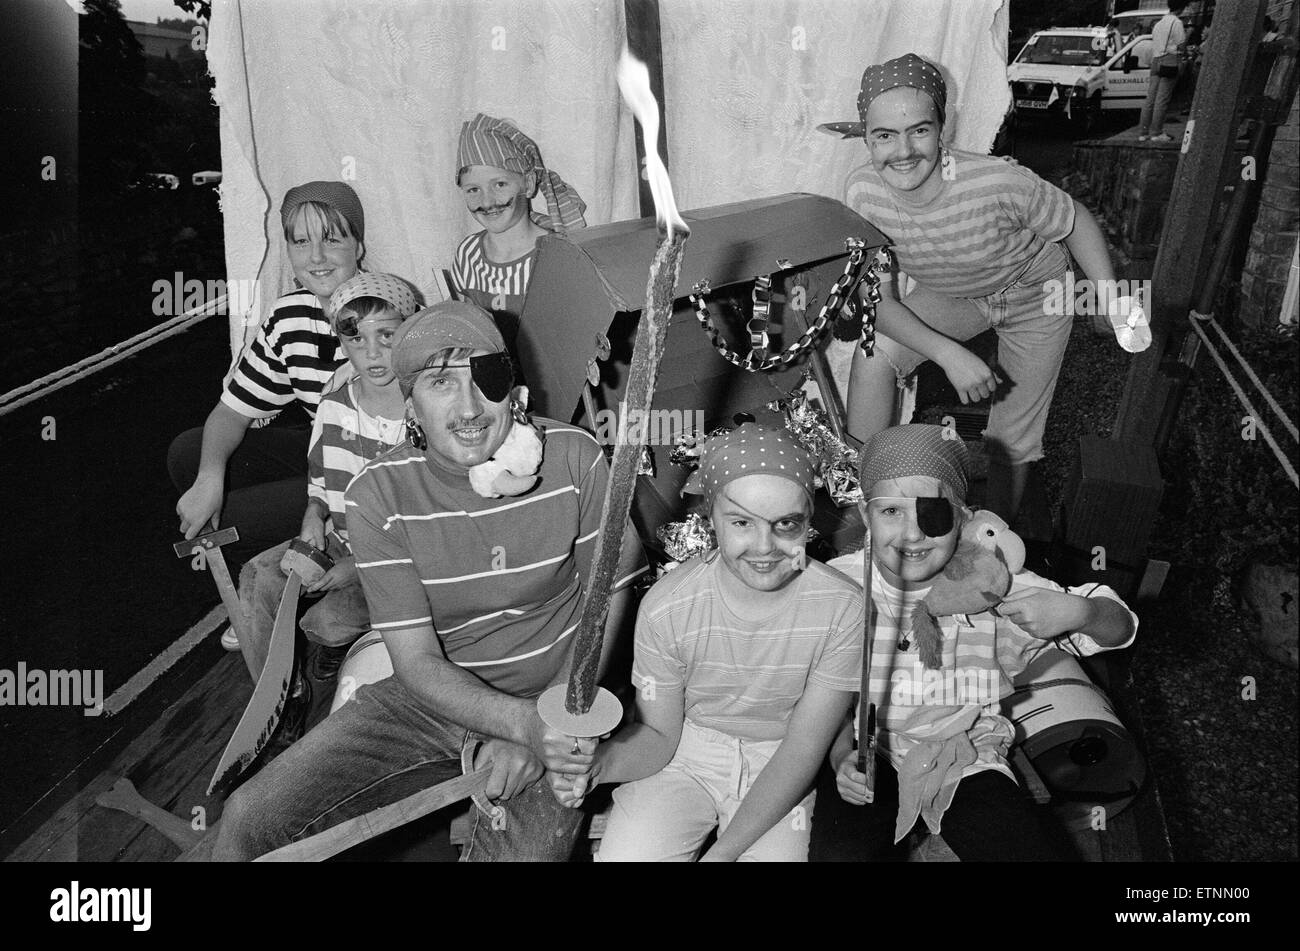 Holmfirth annual torchlight procession 1st September 1991. Pirates leader Malcolm Howlett, vice president of Holmfirth and Meltham Lions club and his young crew on their float. Stock Photo